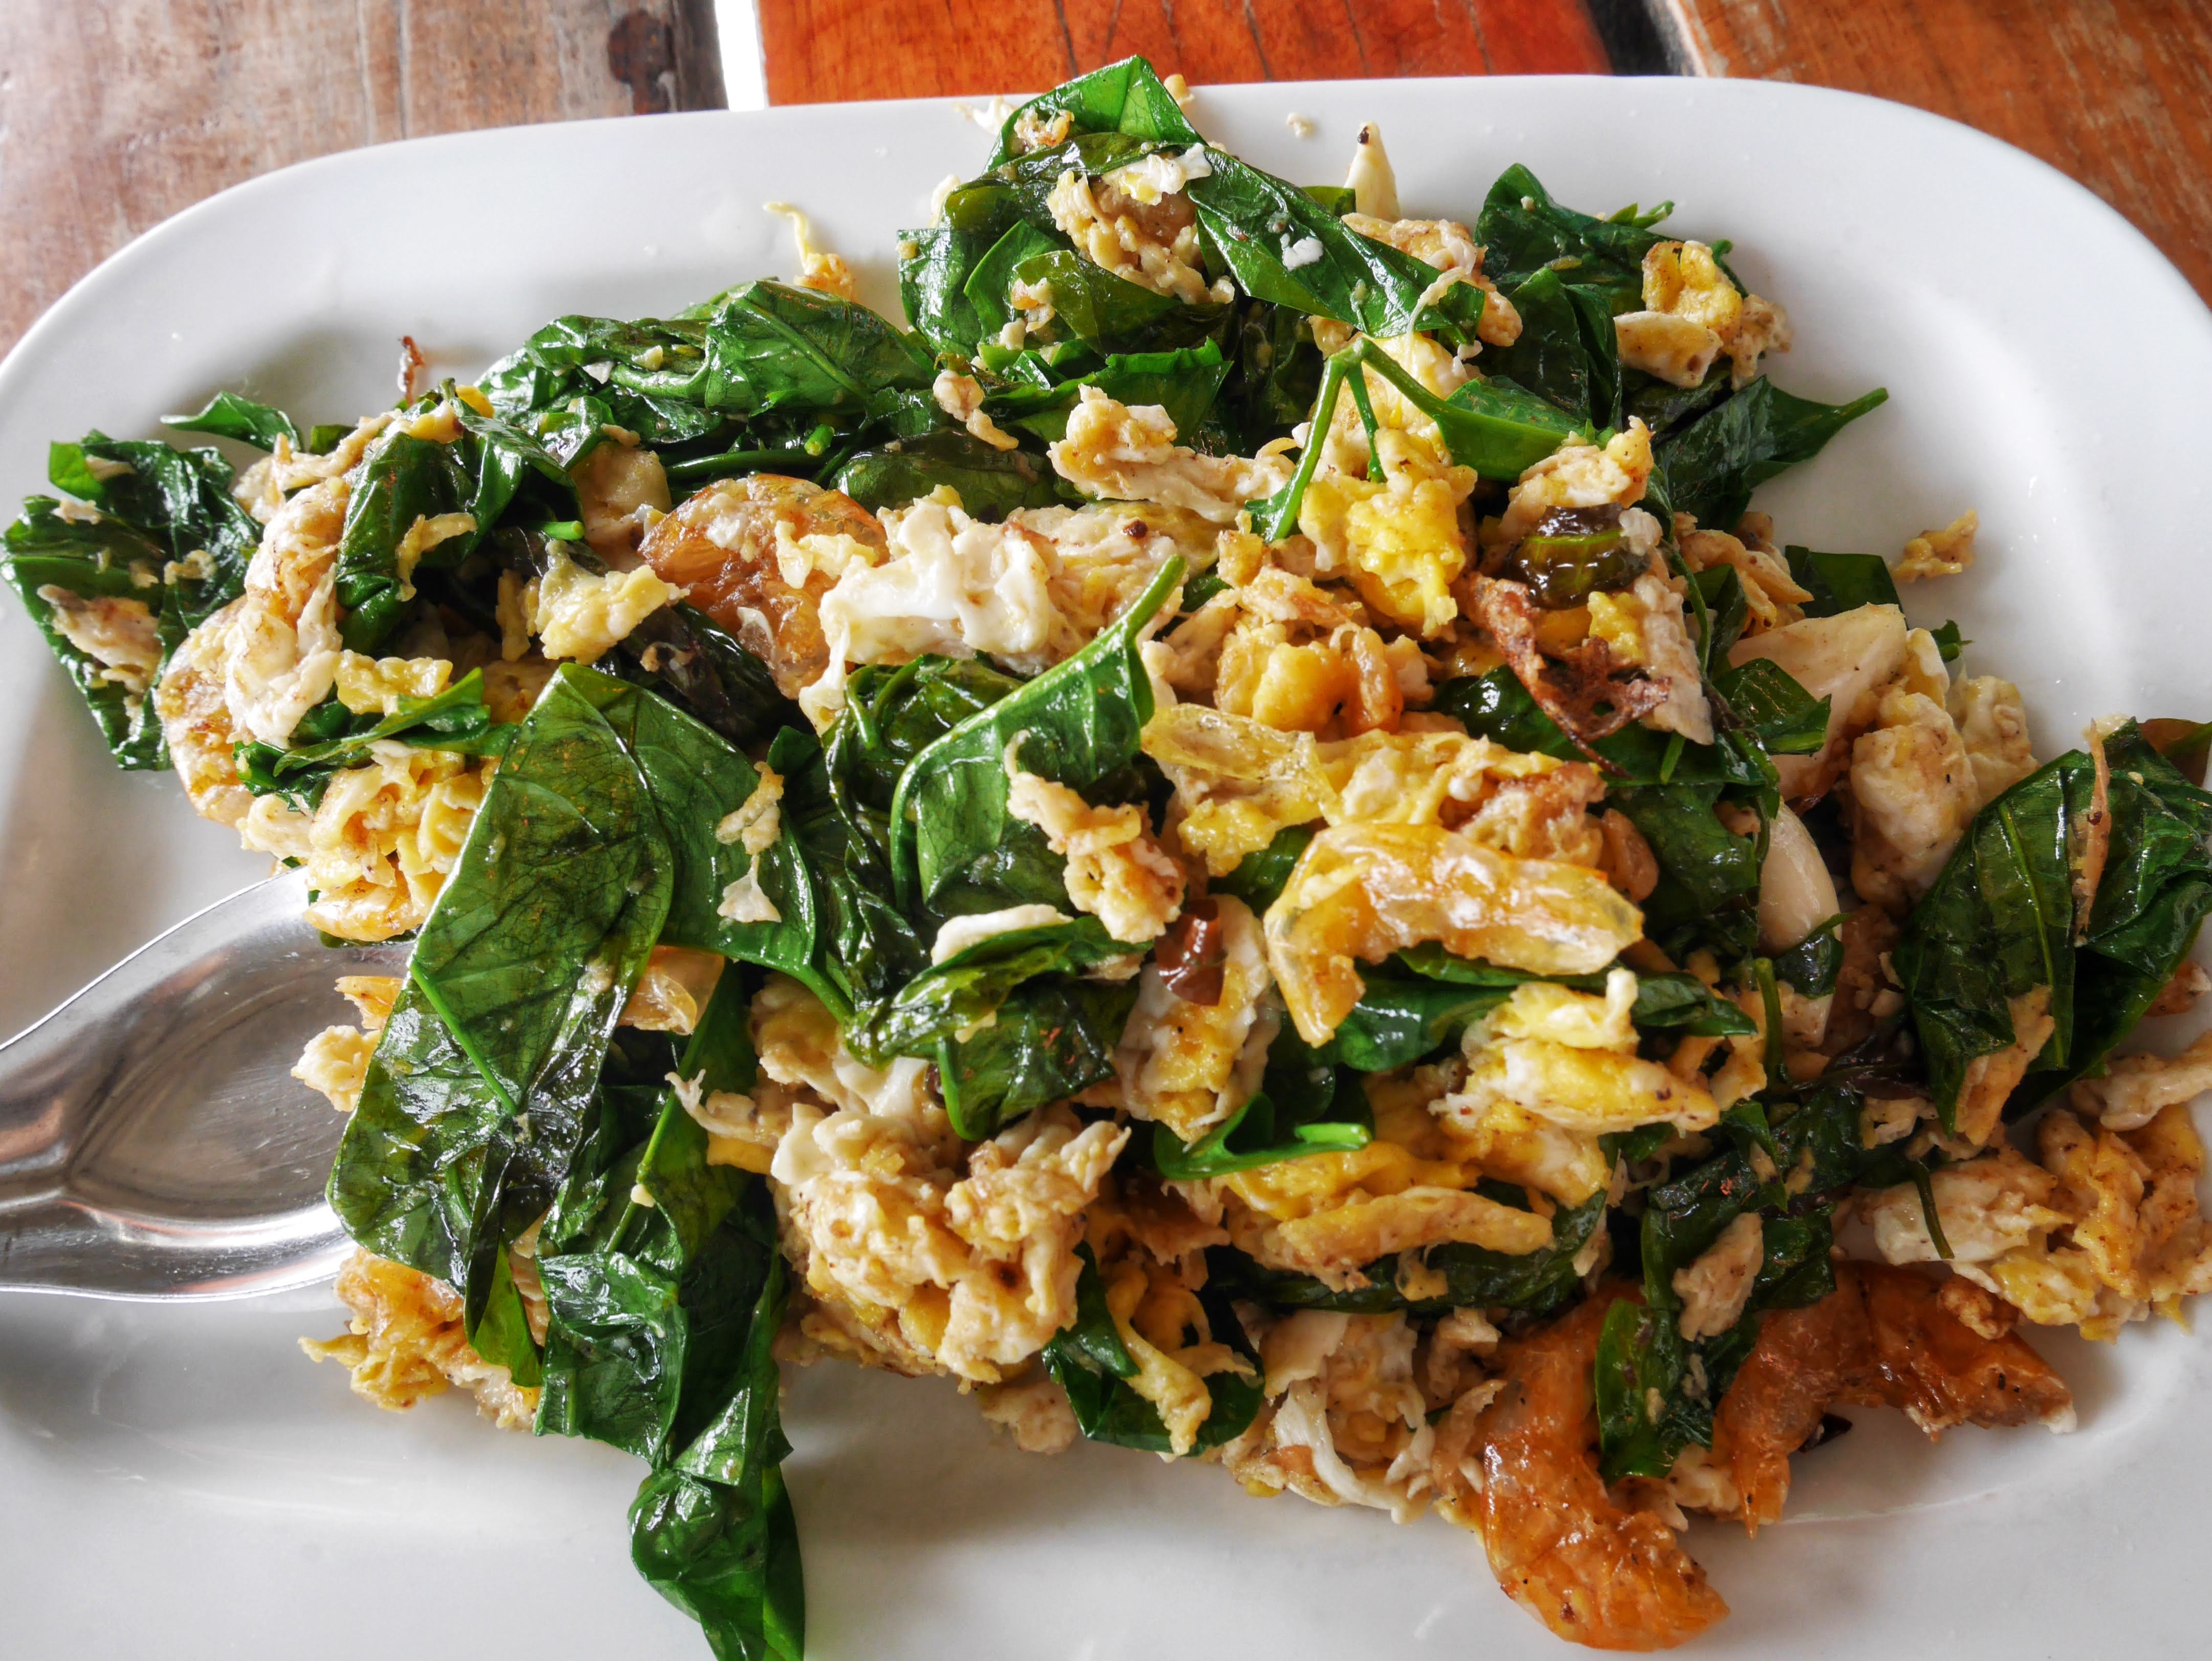 Bai Lieng Pad Kai, or Stir-fried Melinjo leaves with Egg in Hat Yai, Thailand